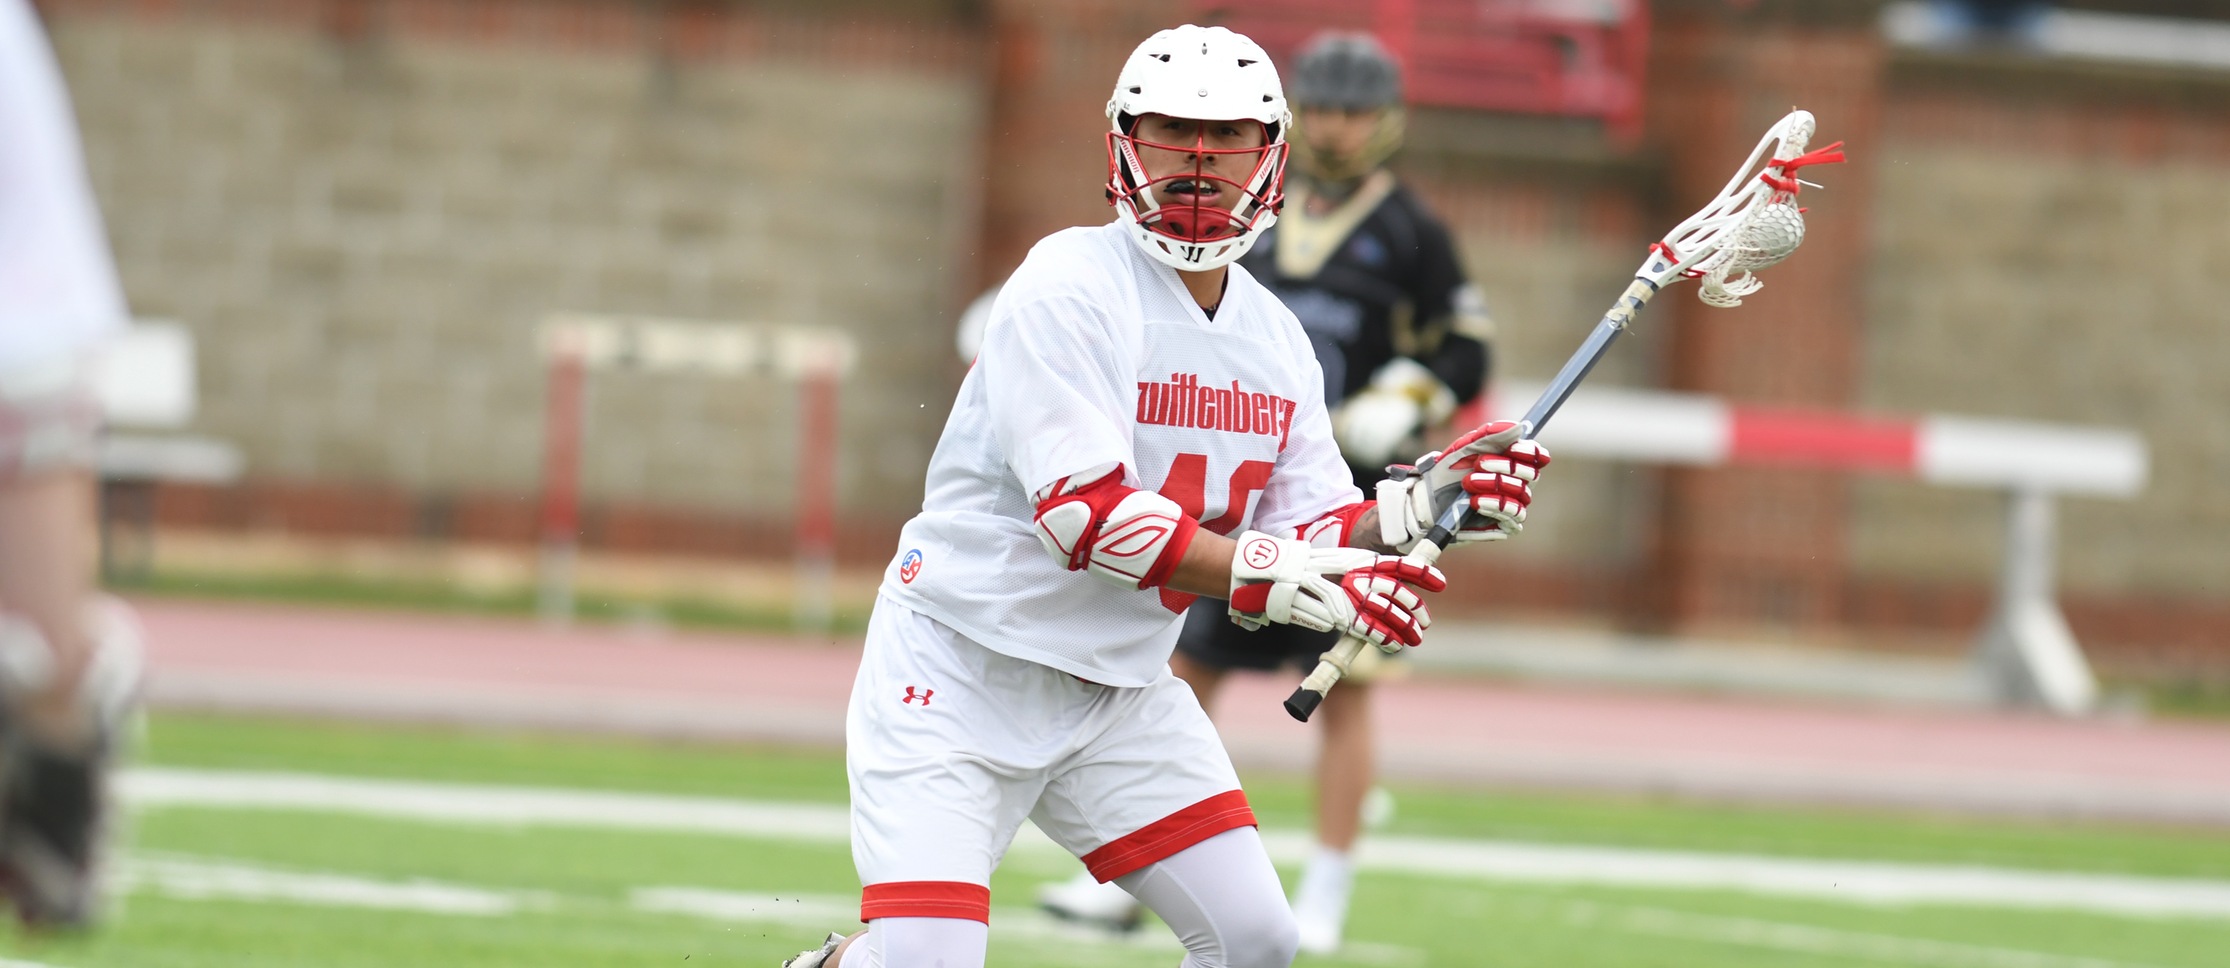 Tigers Upend Wabash 21-4 For Second Straight NCAC Victory